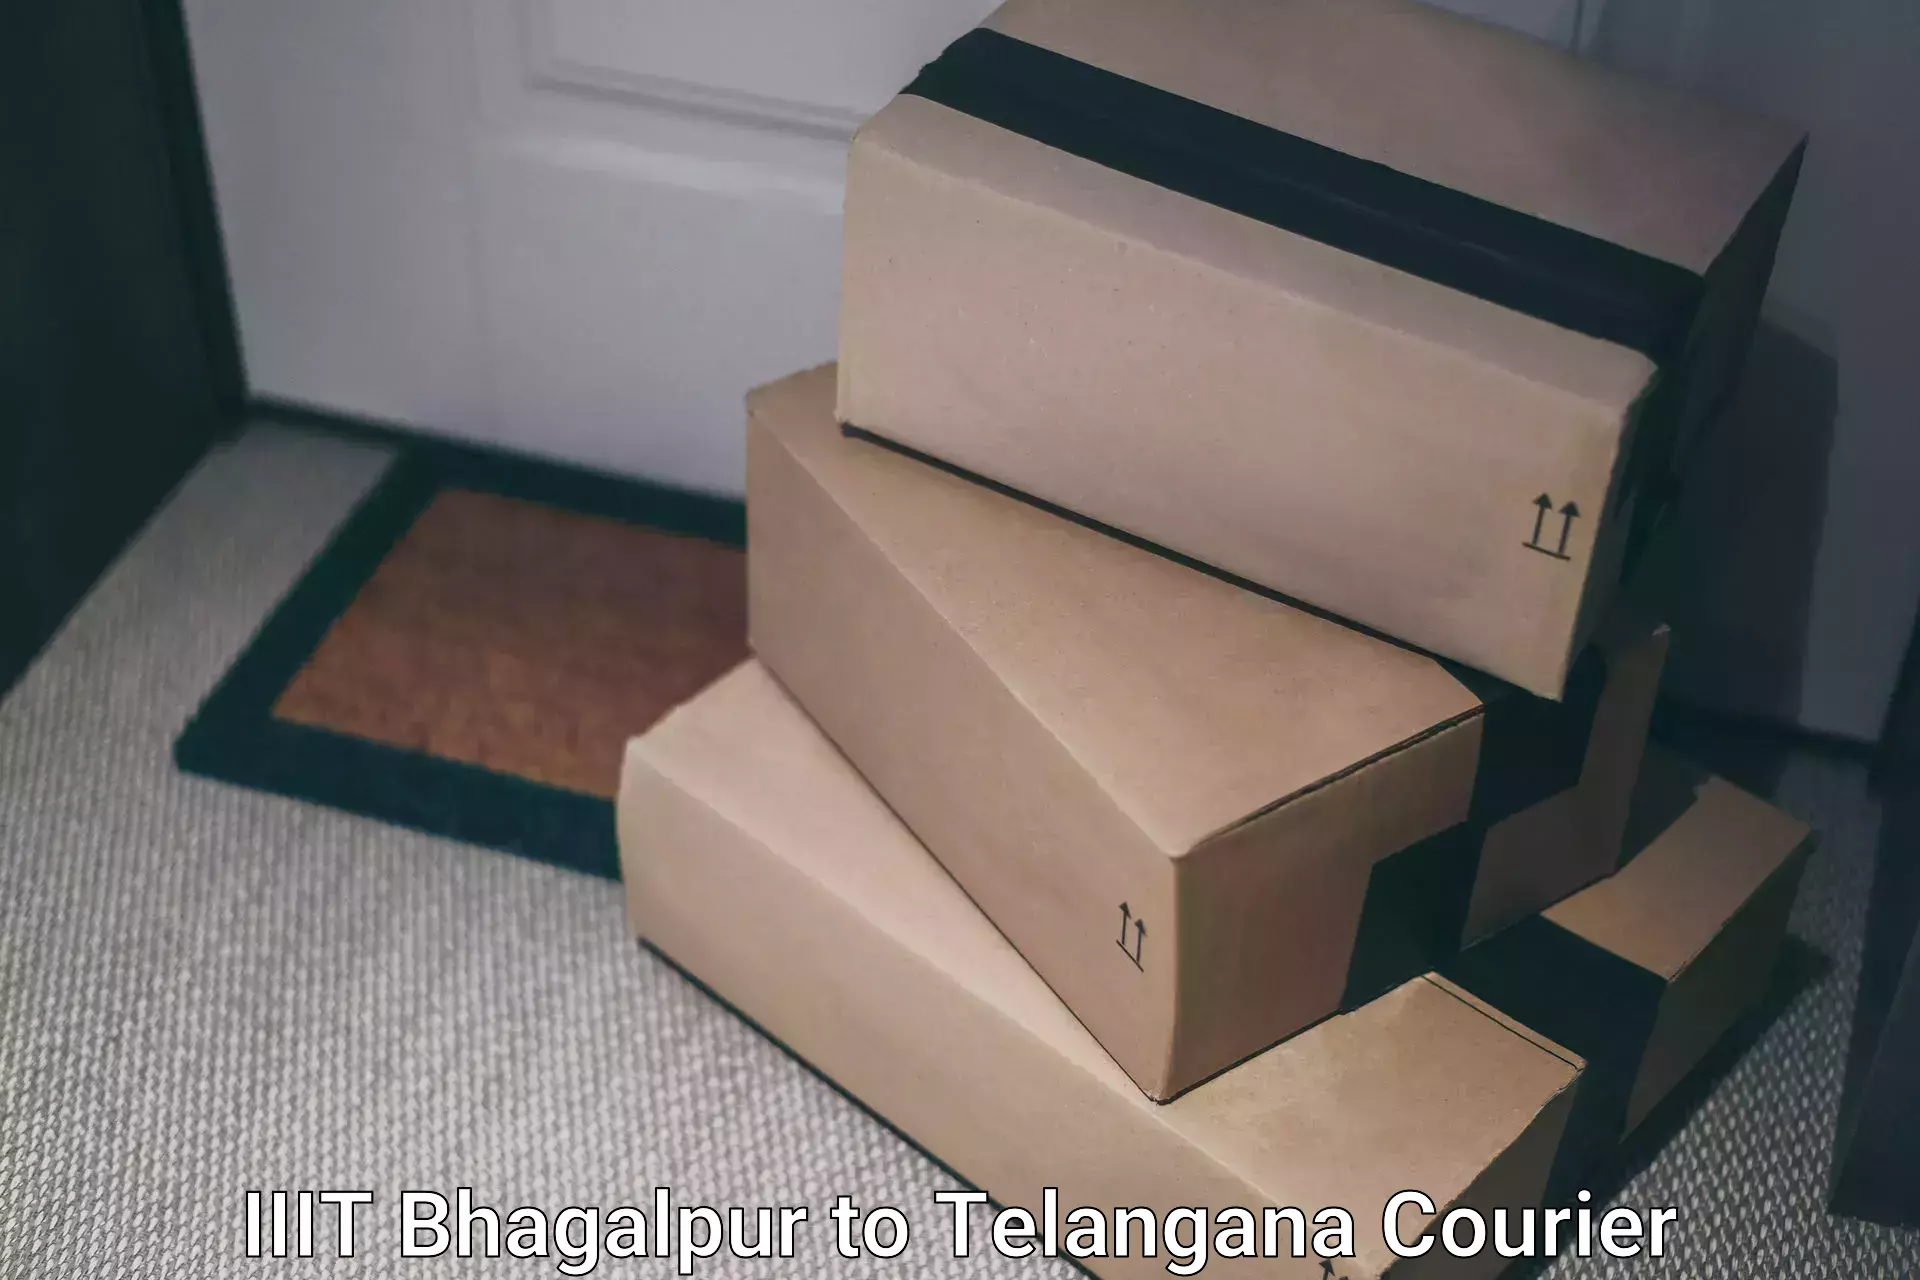 Global shipping networks IIIT Bhagalpur to Jogipet